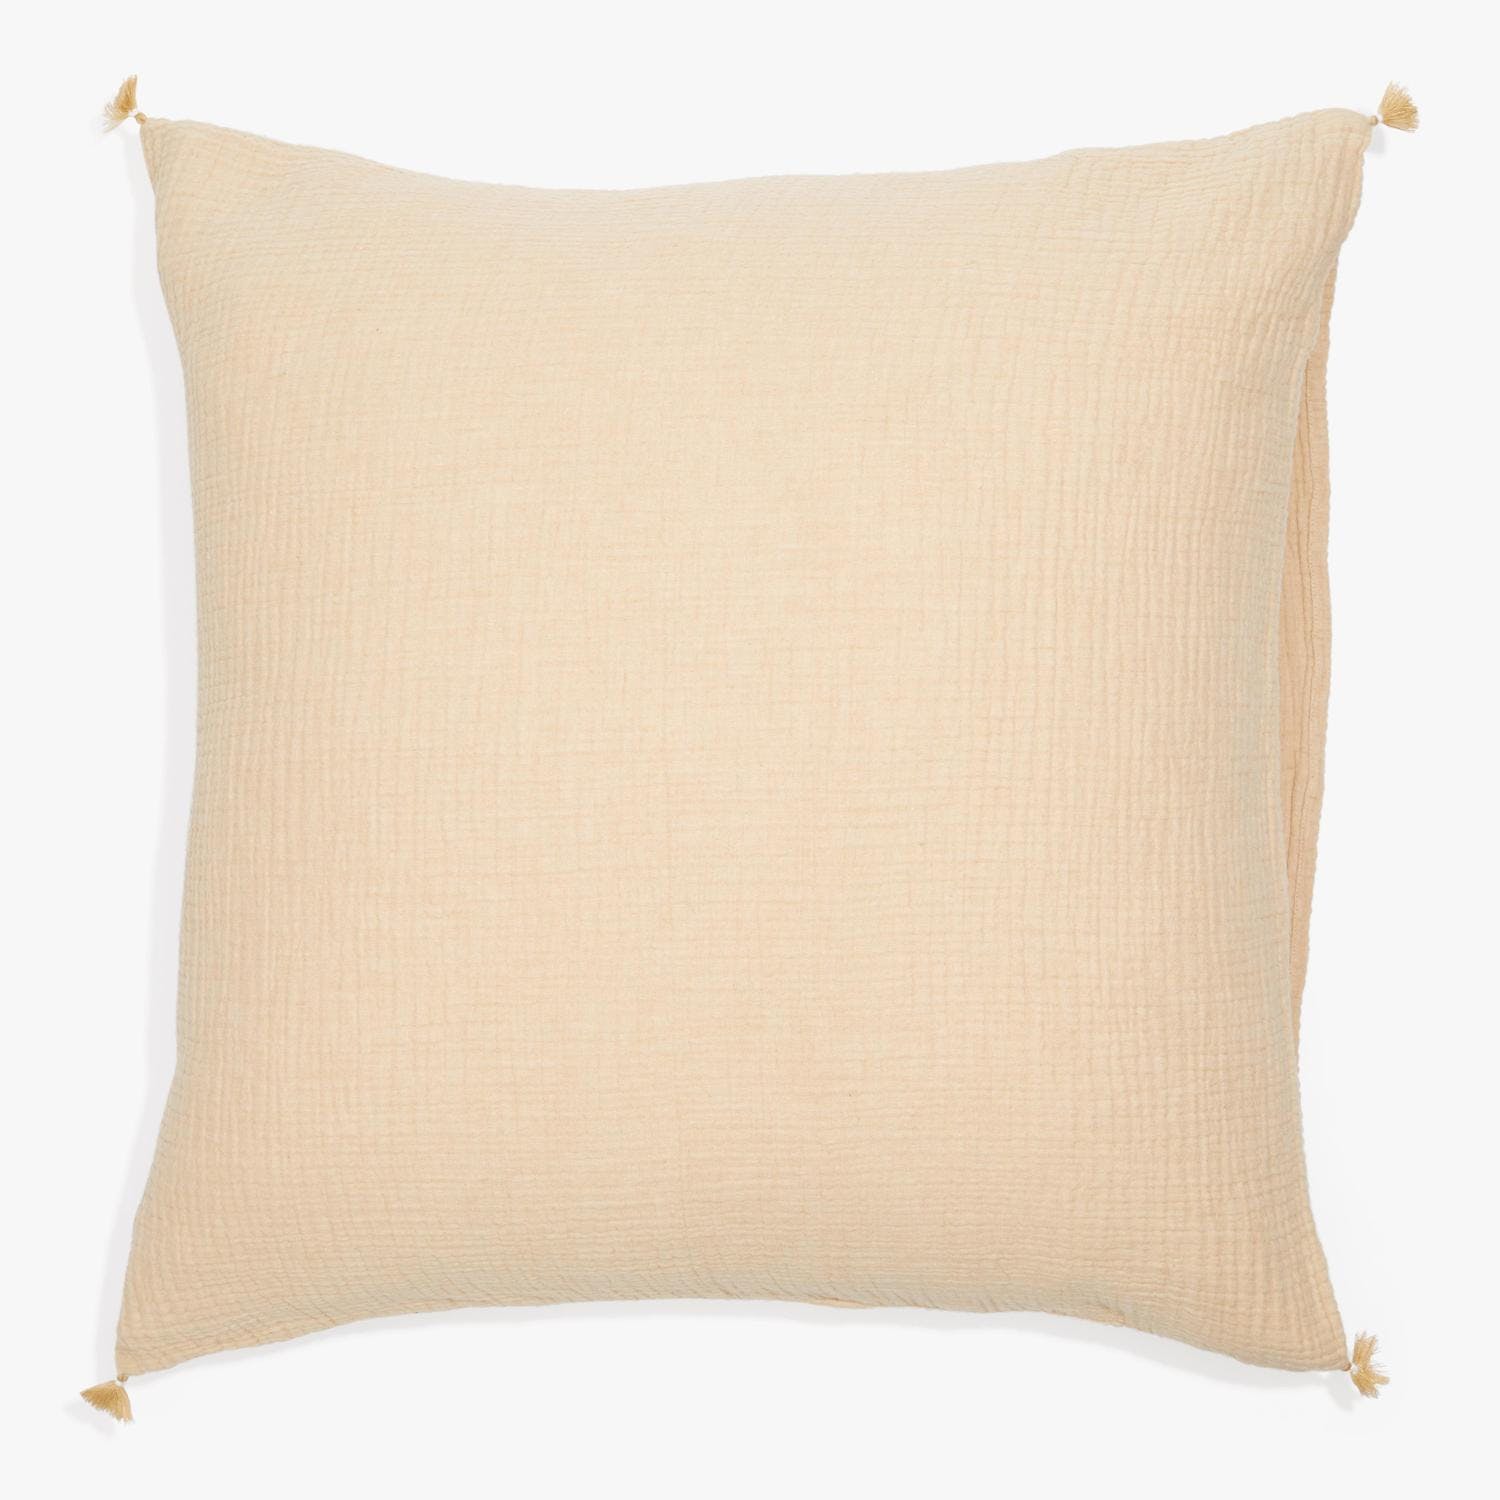 Plain, light-colored cushion with tassels in a neutral design.